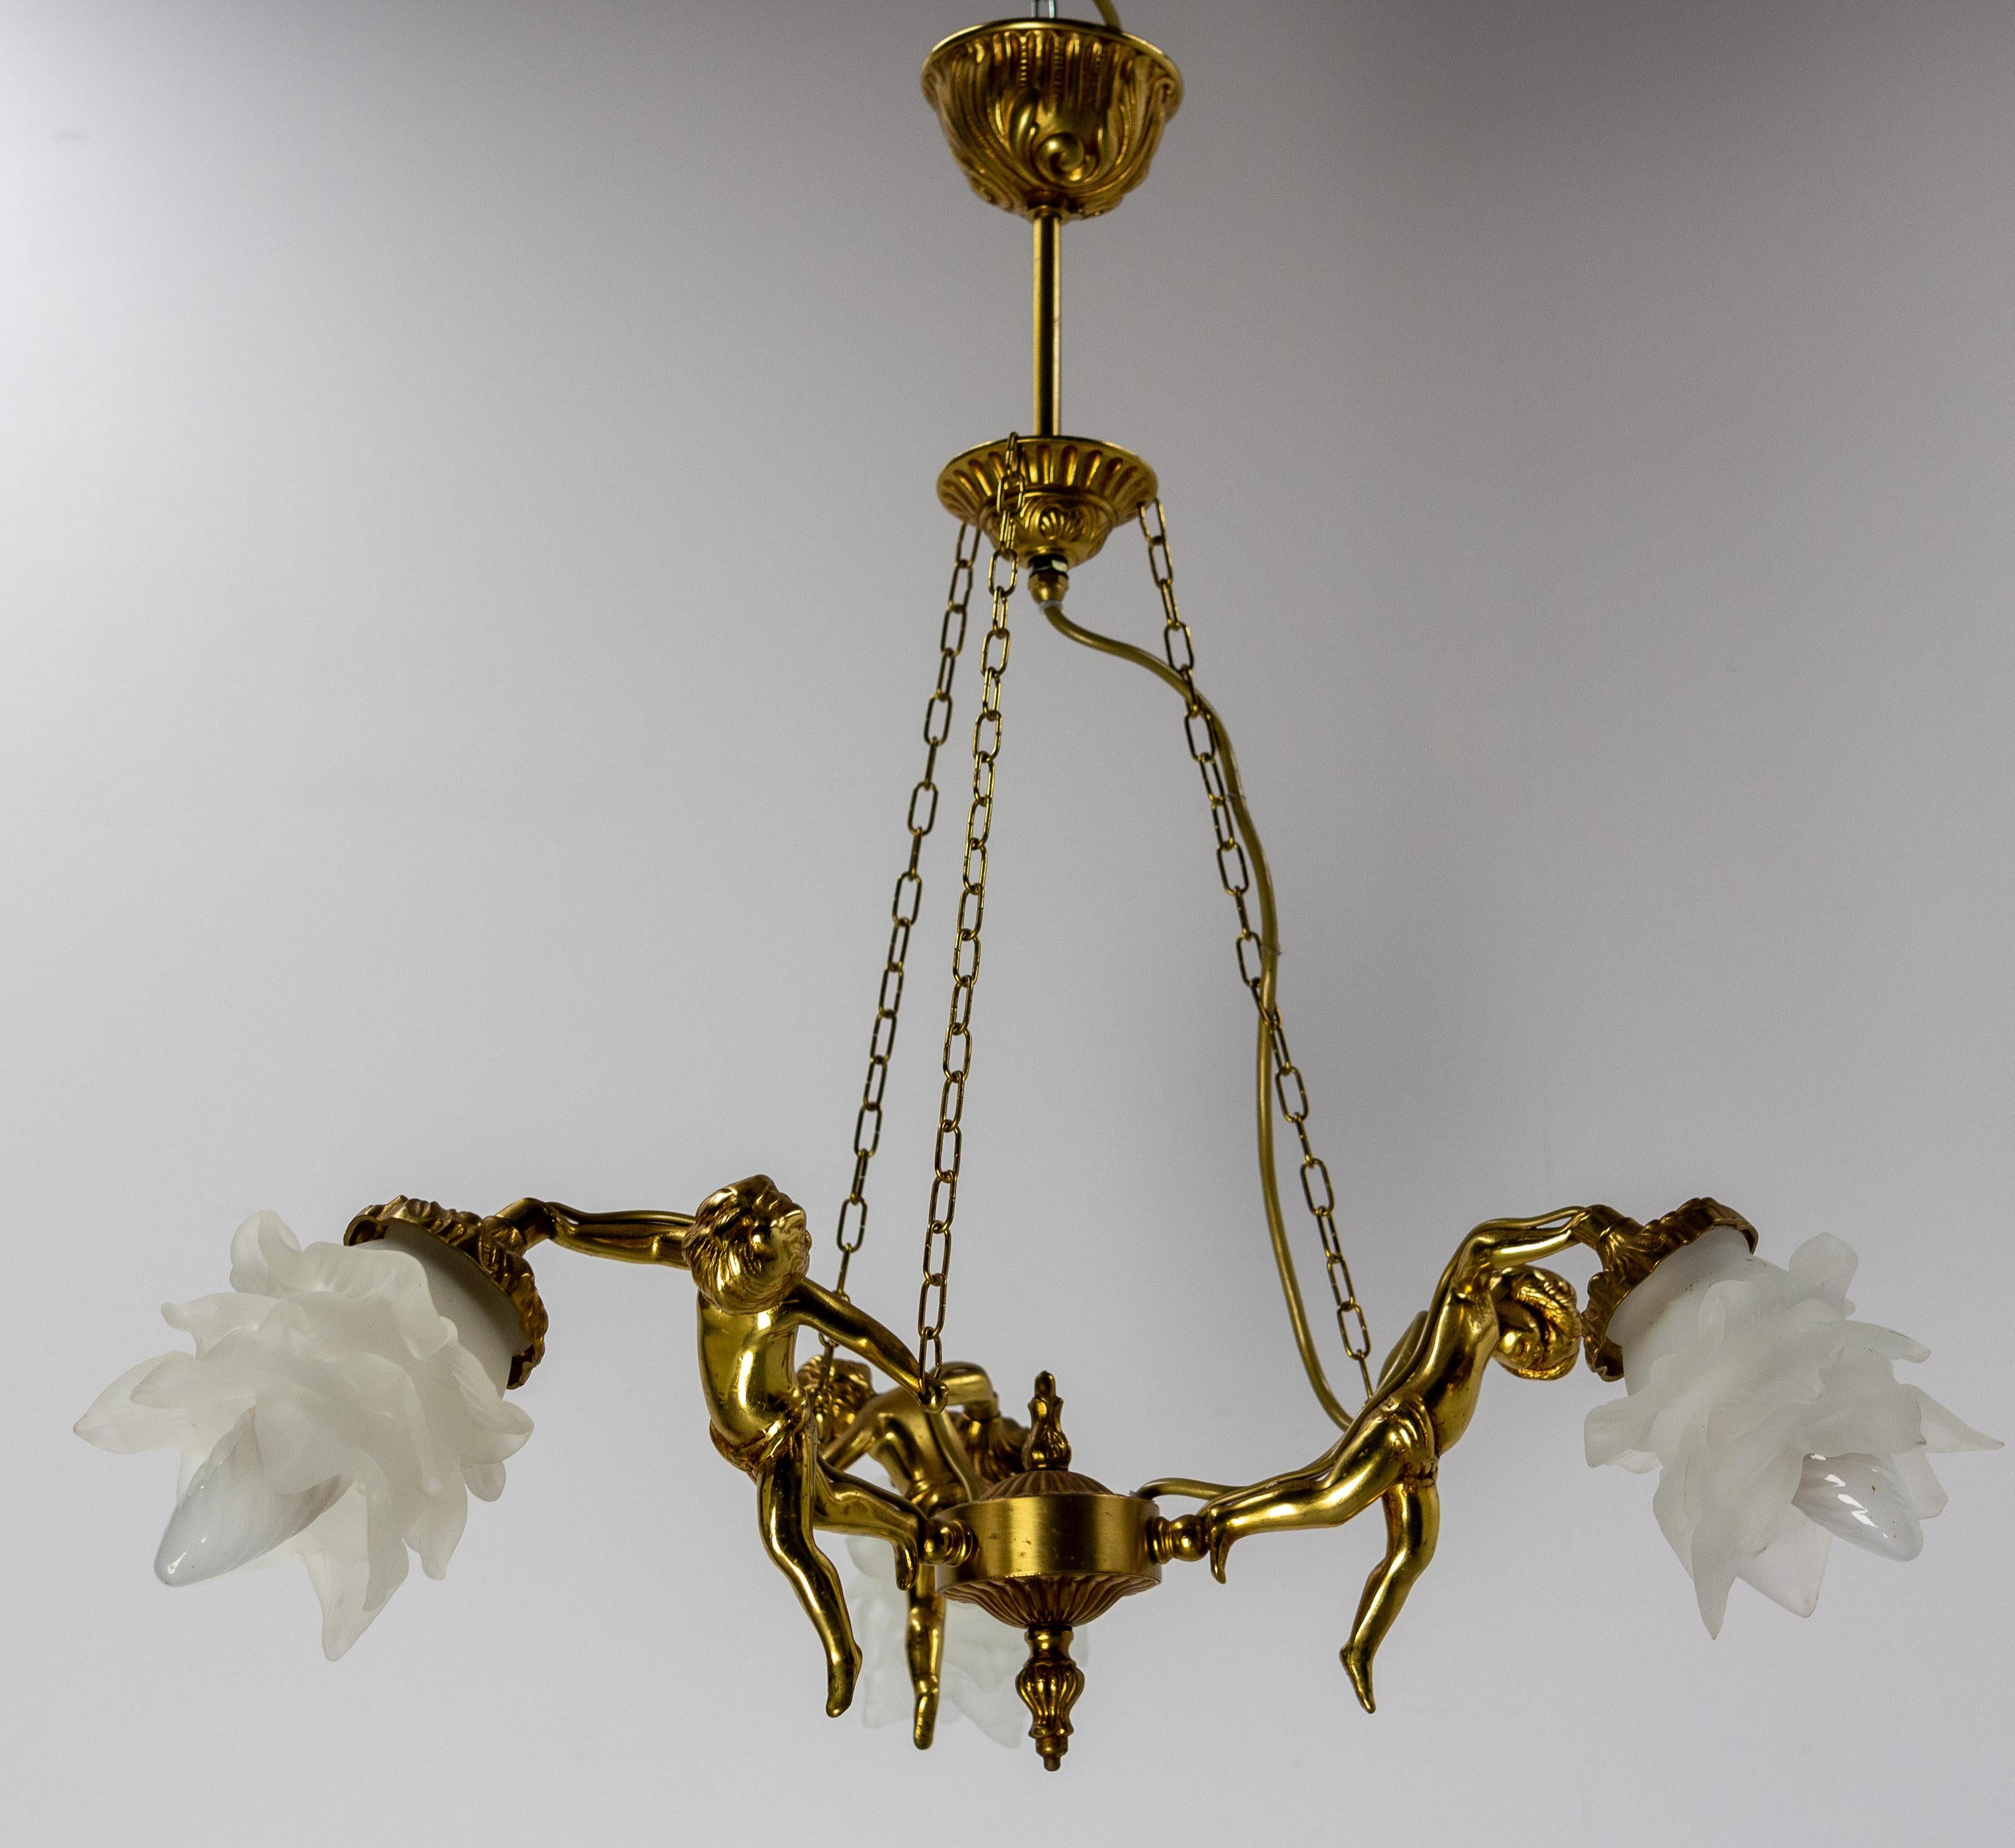 Ceiling pendant, France.
Lustre made in brass with frozen glass for the tulips. 
Soft and pleasant lighting.
This chandelier is conform to USA and EU or UK standards.
Good condition.

Shipping : 55 / 62 / 18 cm 4.6 kg.
 